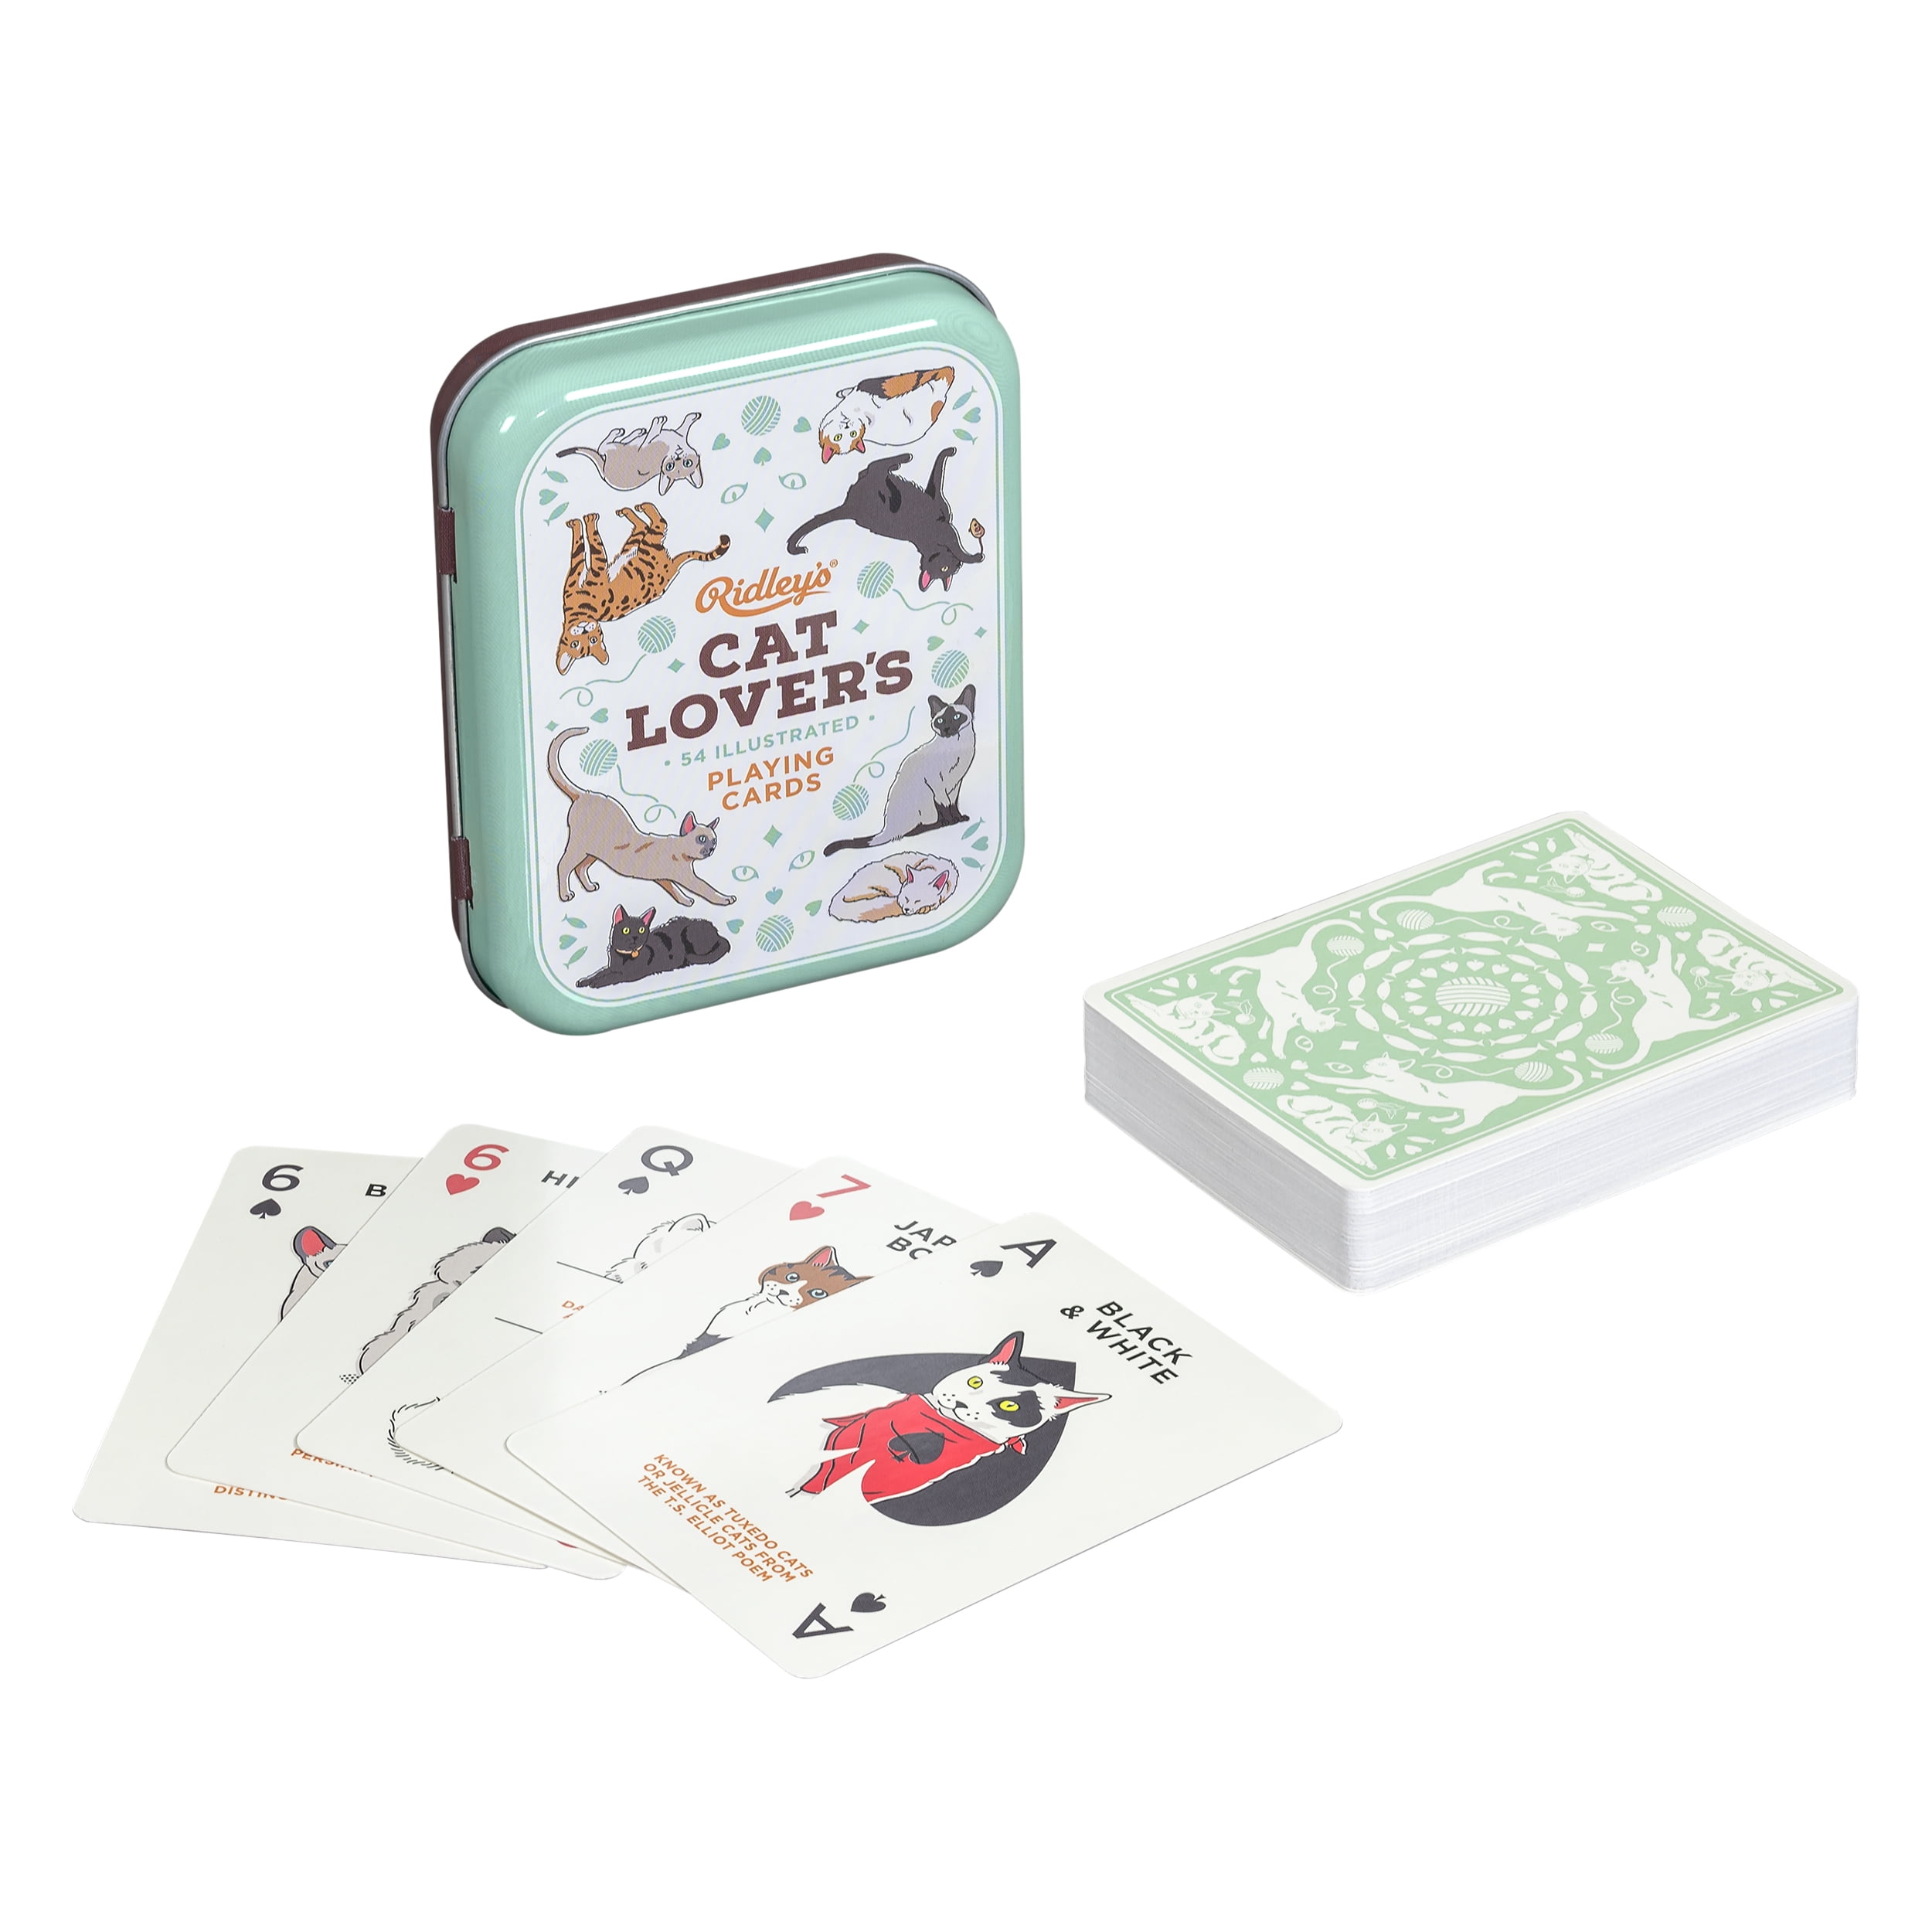 CATS OF THE NATURAL WORLD PLAYING CARDS COLLECTION DECK  For Cat Rescue